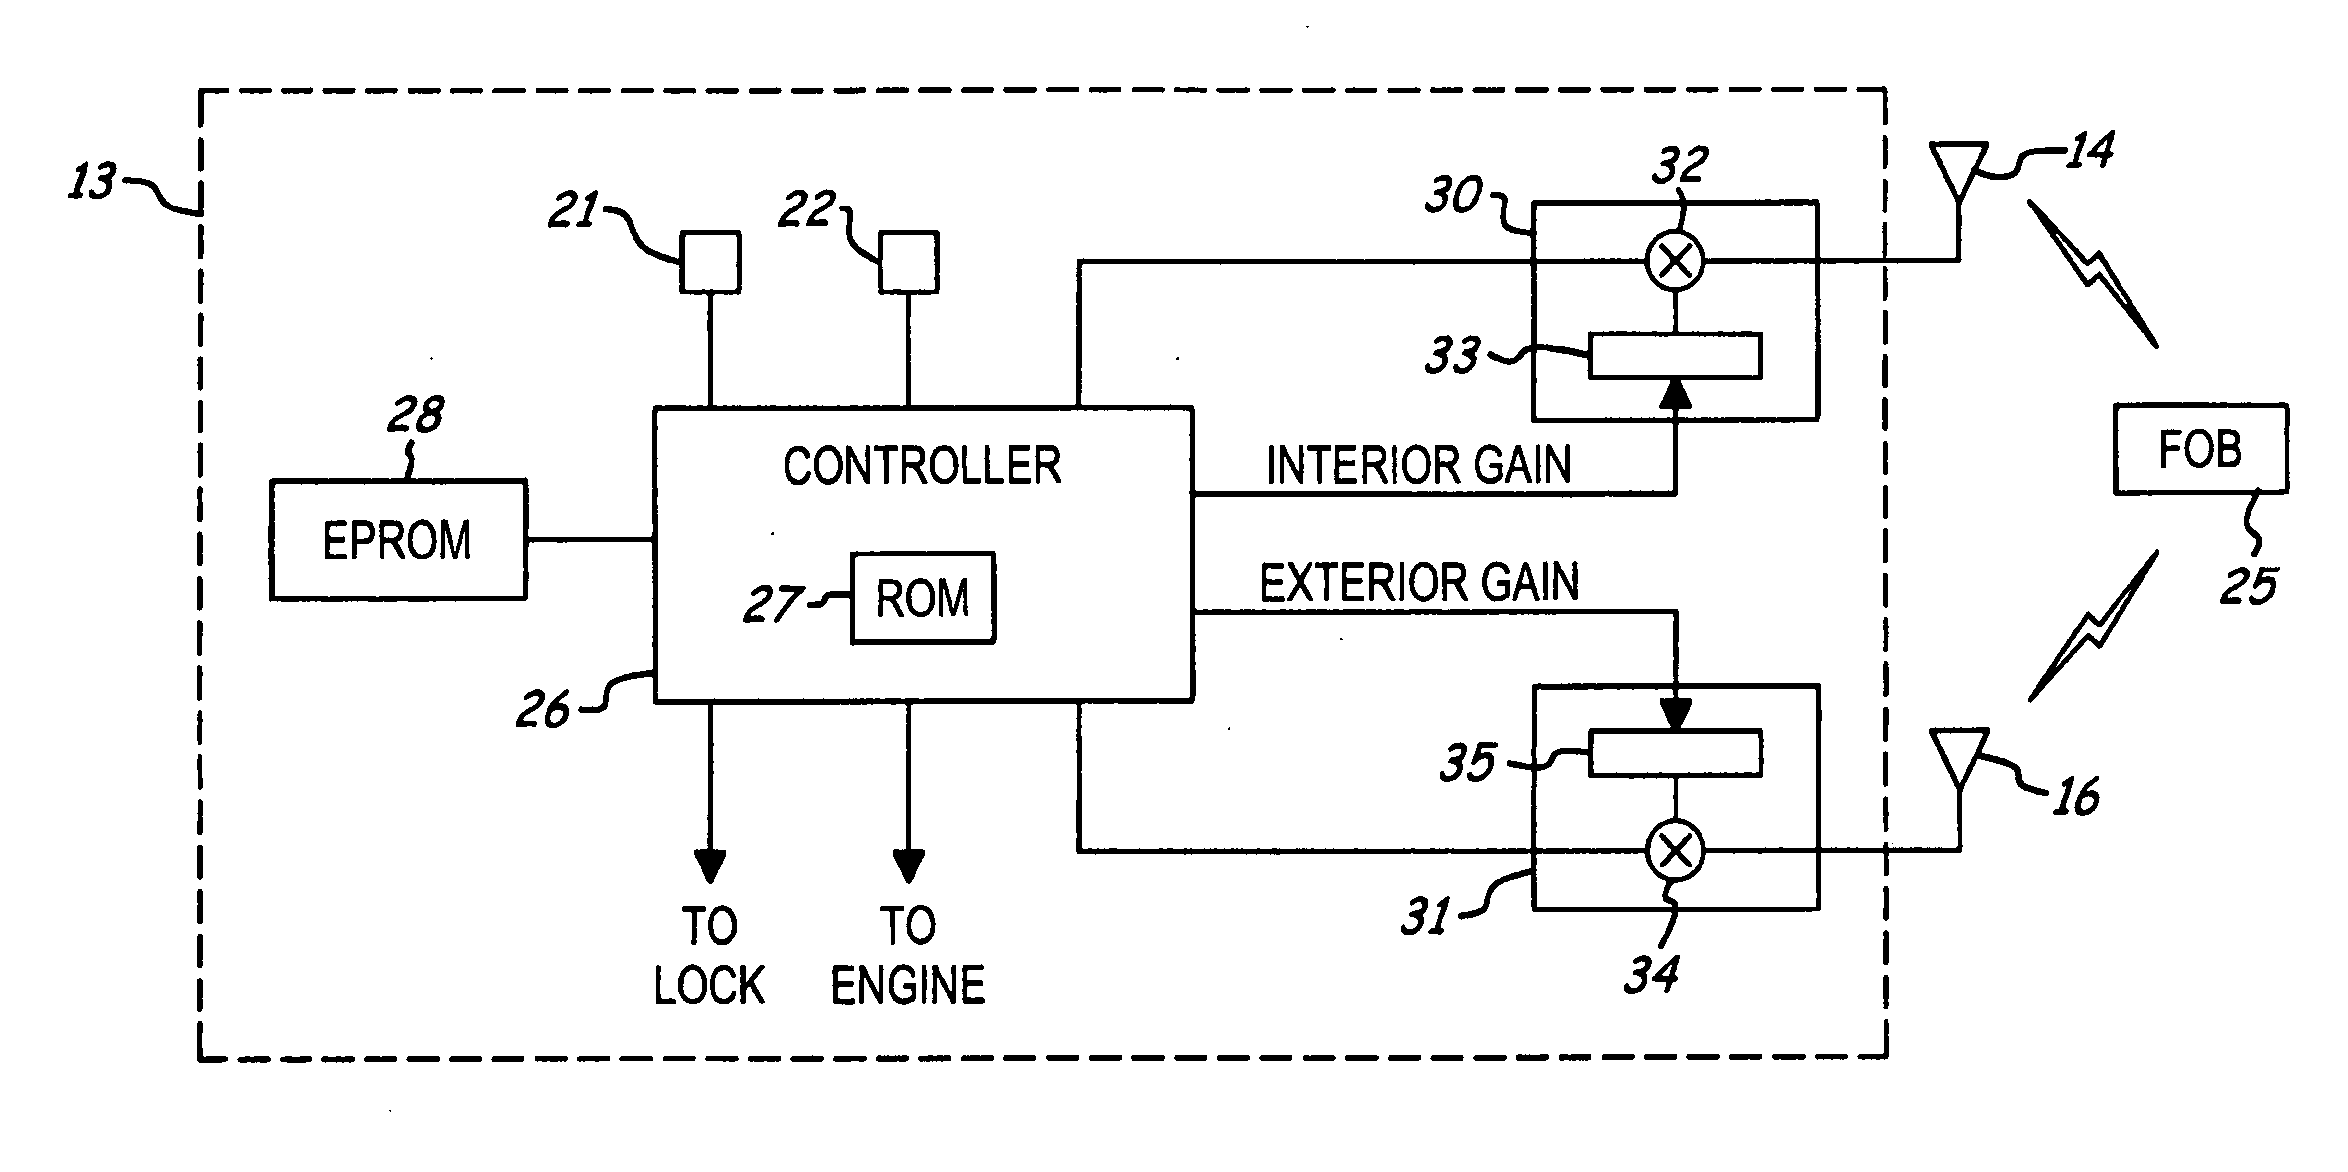 Vehicle independent passive entry system